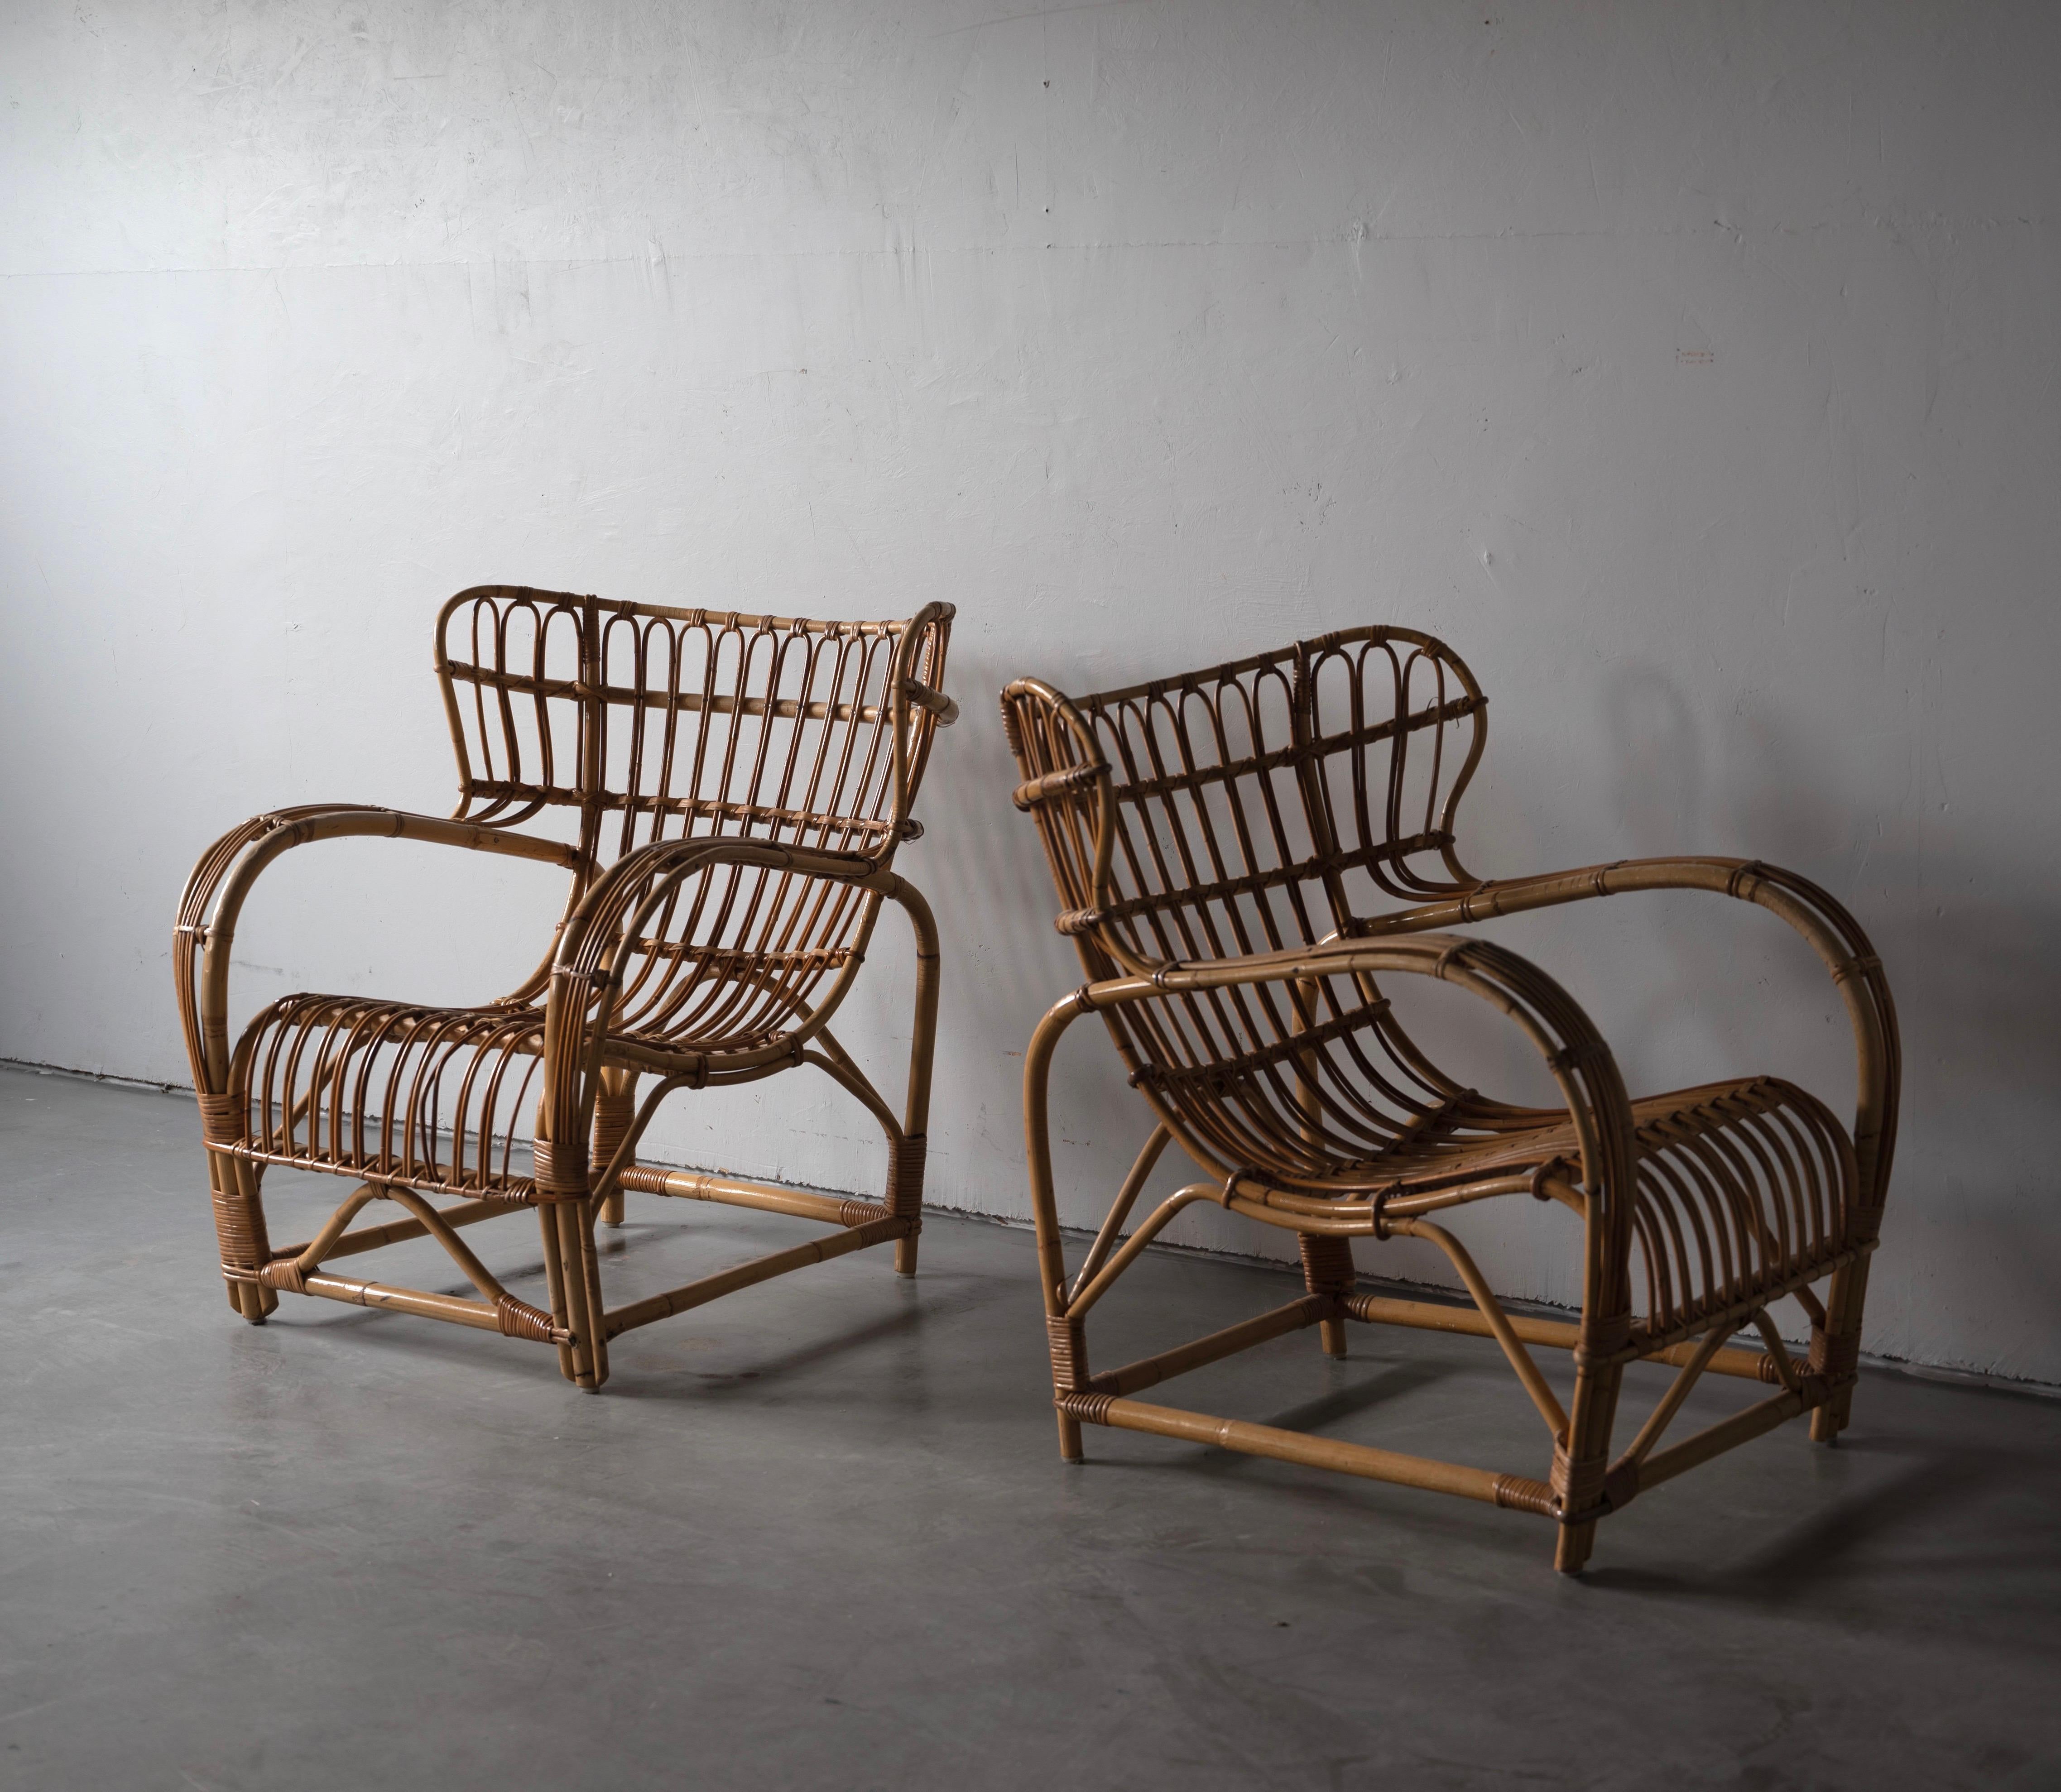 A pair of lounge chairs. Design attributed to Viggo Boesen. Presumably produced by E. V. A. Nissen & Co., Denmark. c. 1940s-1950s.

In moulded bamboo with rattan / cane details.

Seat height measured from highest point of seat.

Other